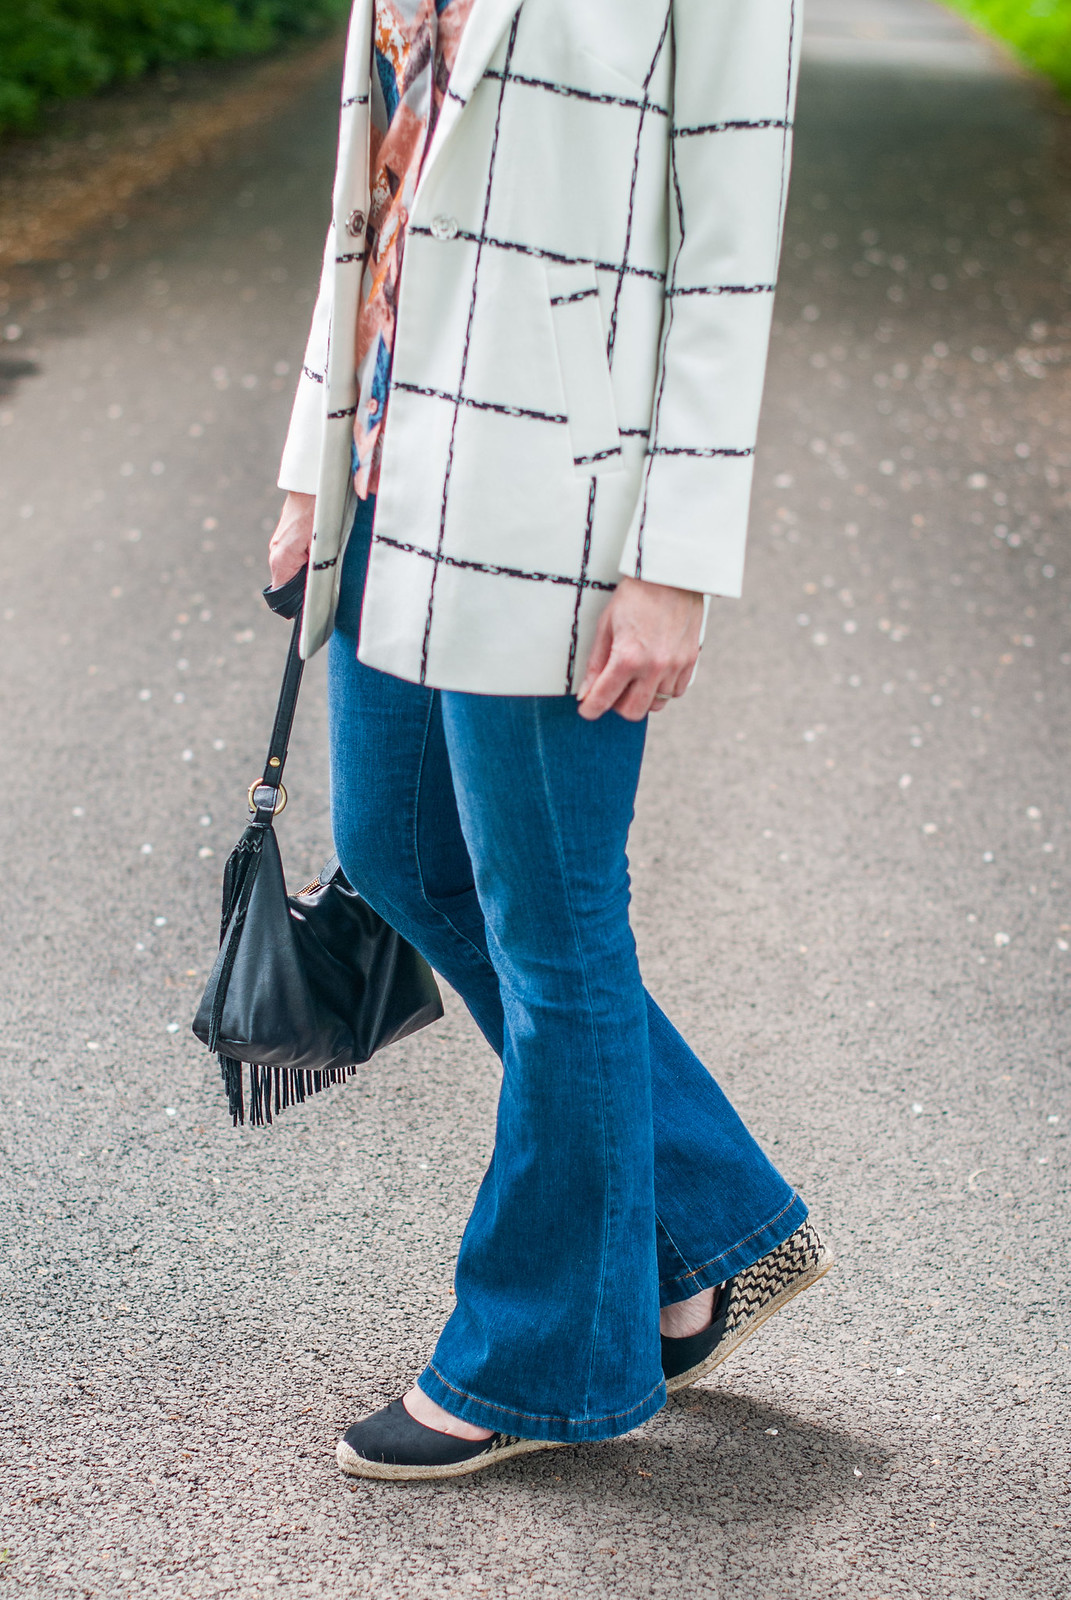 Pattern mixing: Black and white window pane jacket abstract print pyjama shirt denim flares wedge espadrilles | Not Dressed As Lamb, over 40 style